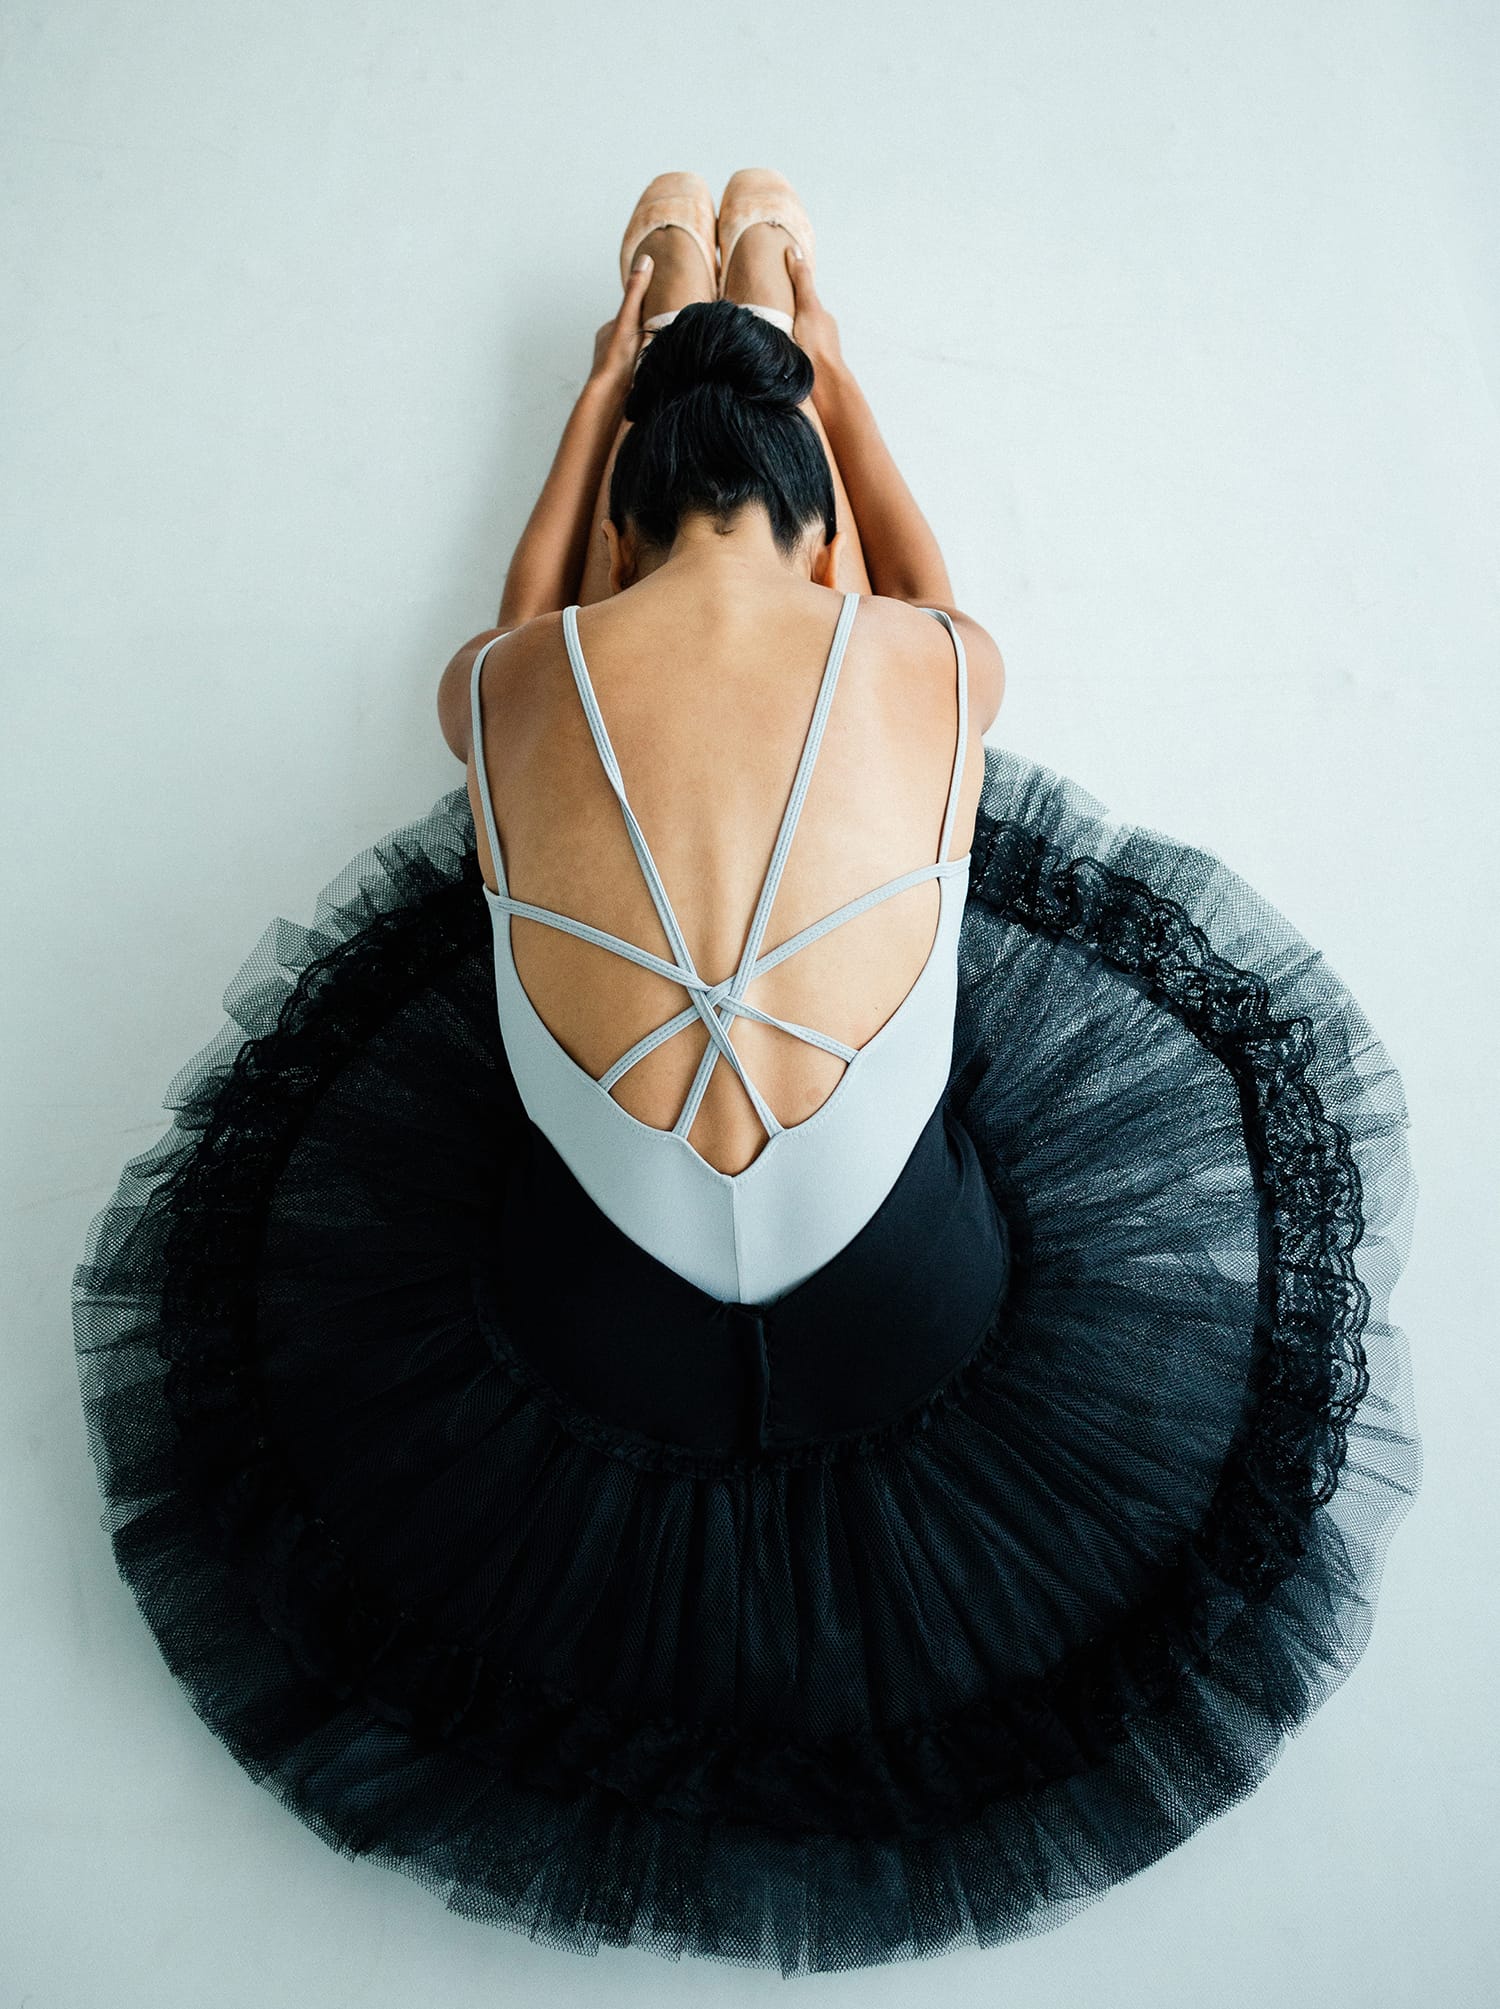 Tips & Tricks For Getting Started With Ballet Photography